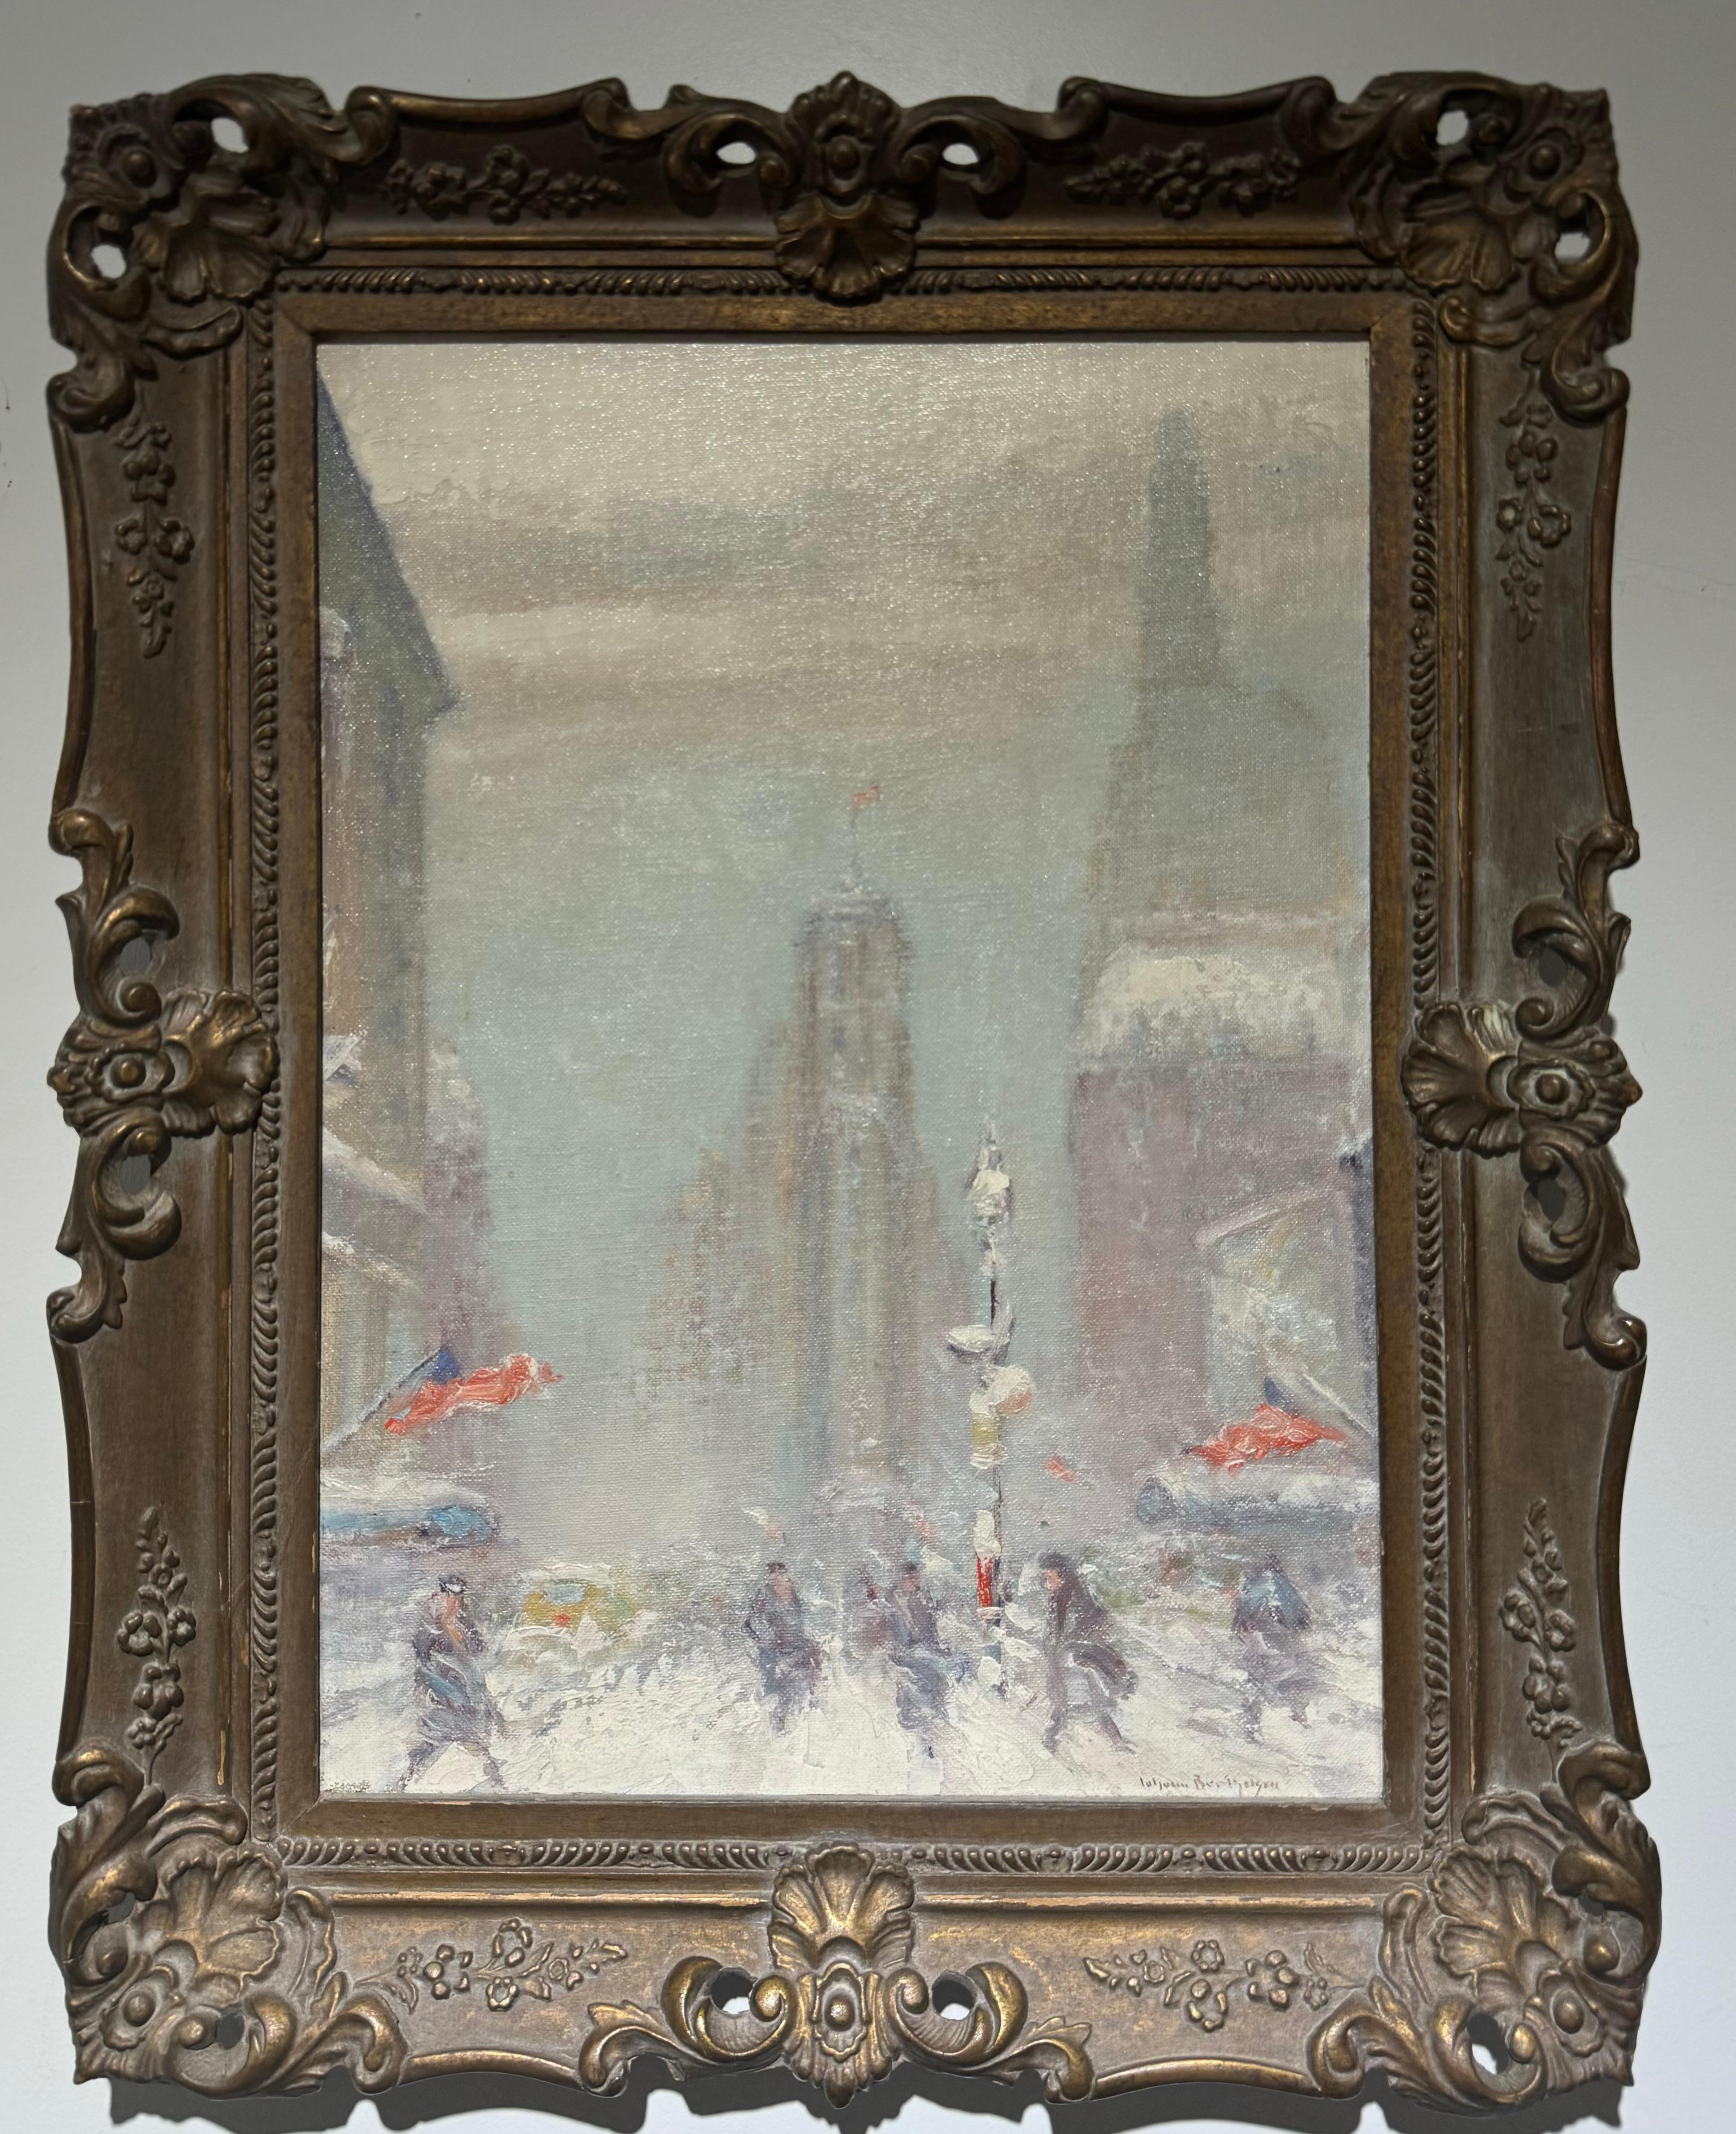 Johann Berthelsen (1883 - 1972) 
Flatiron, Union Square, Broadway
New York City 
Oil on Board
15 x 11inches 
19 X 15 inches with frame
Signed lower right: Johann Berthelsen; 
Original frame 
Painting is very good original condition 

Notice All the